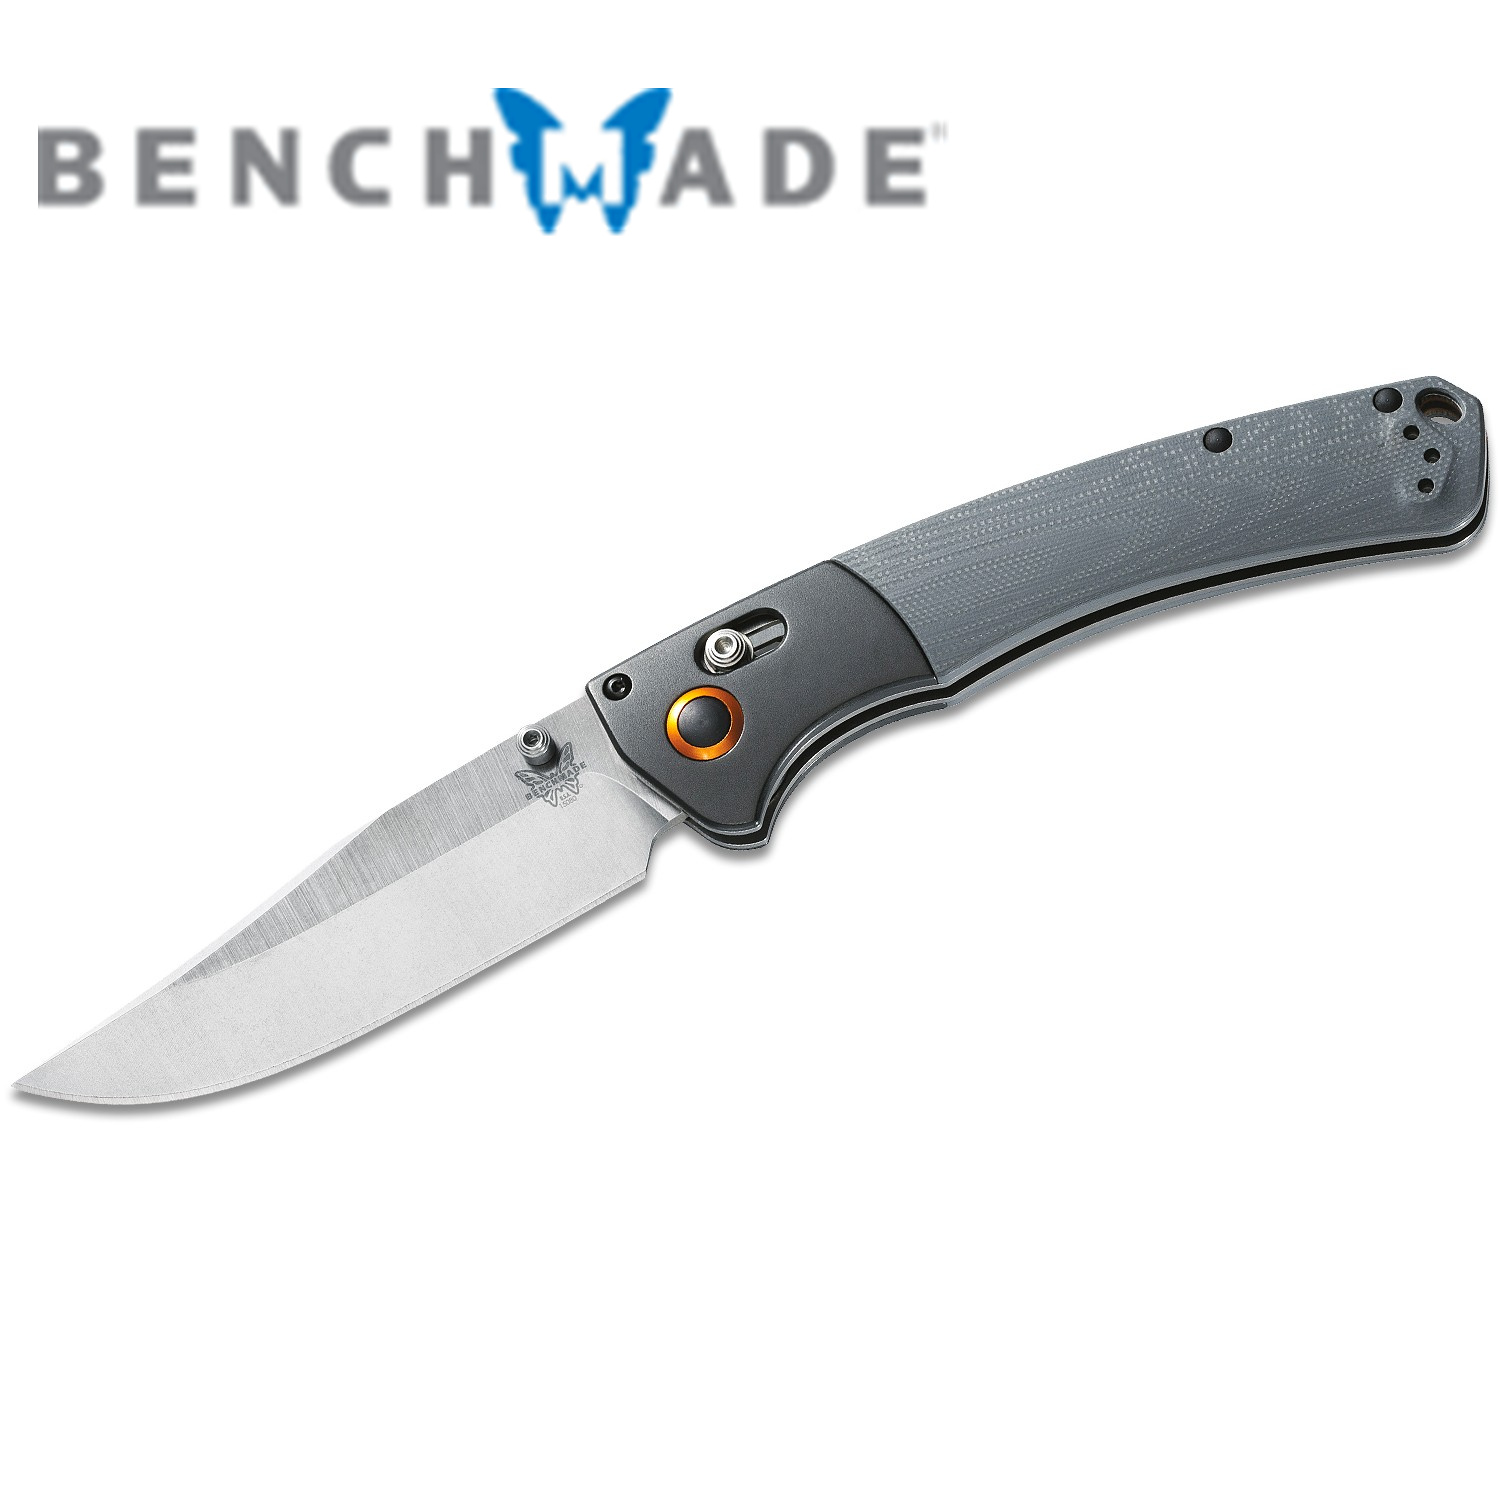 Benchmade 15080-1 Crooked River, grey DISCONTINUED G10 Handle